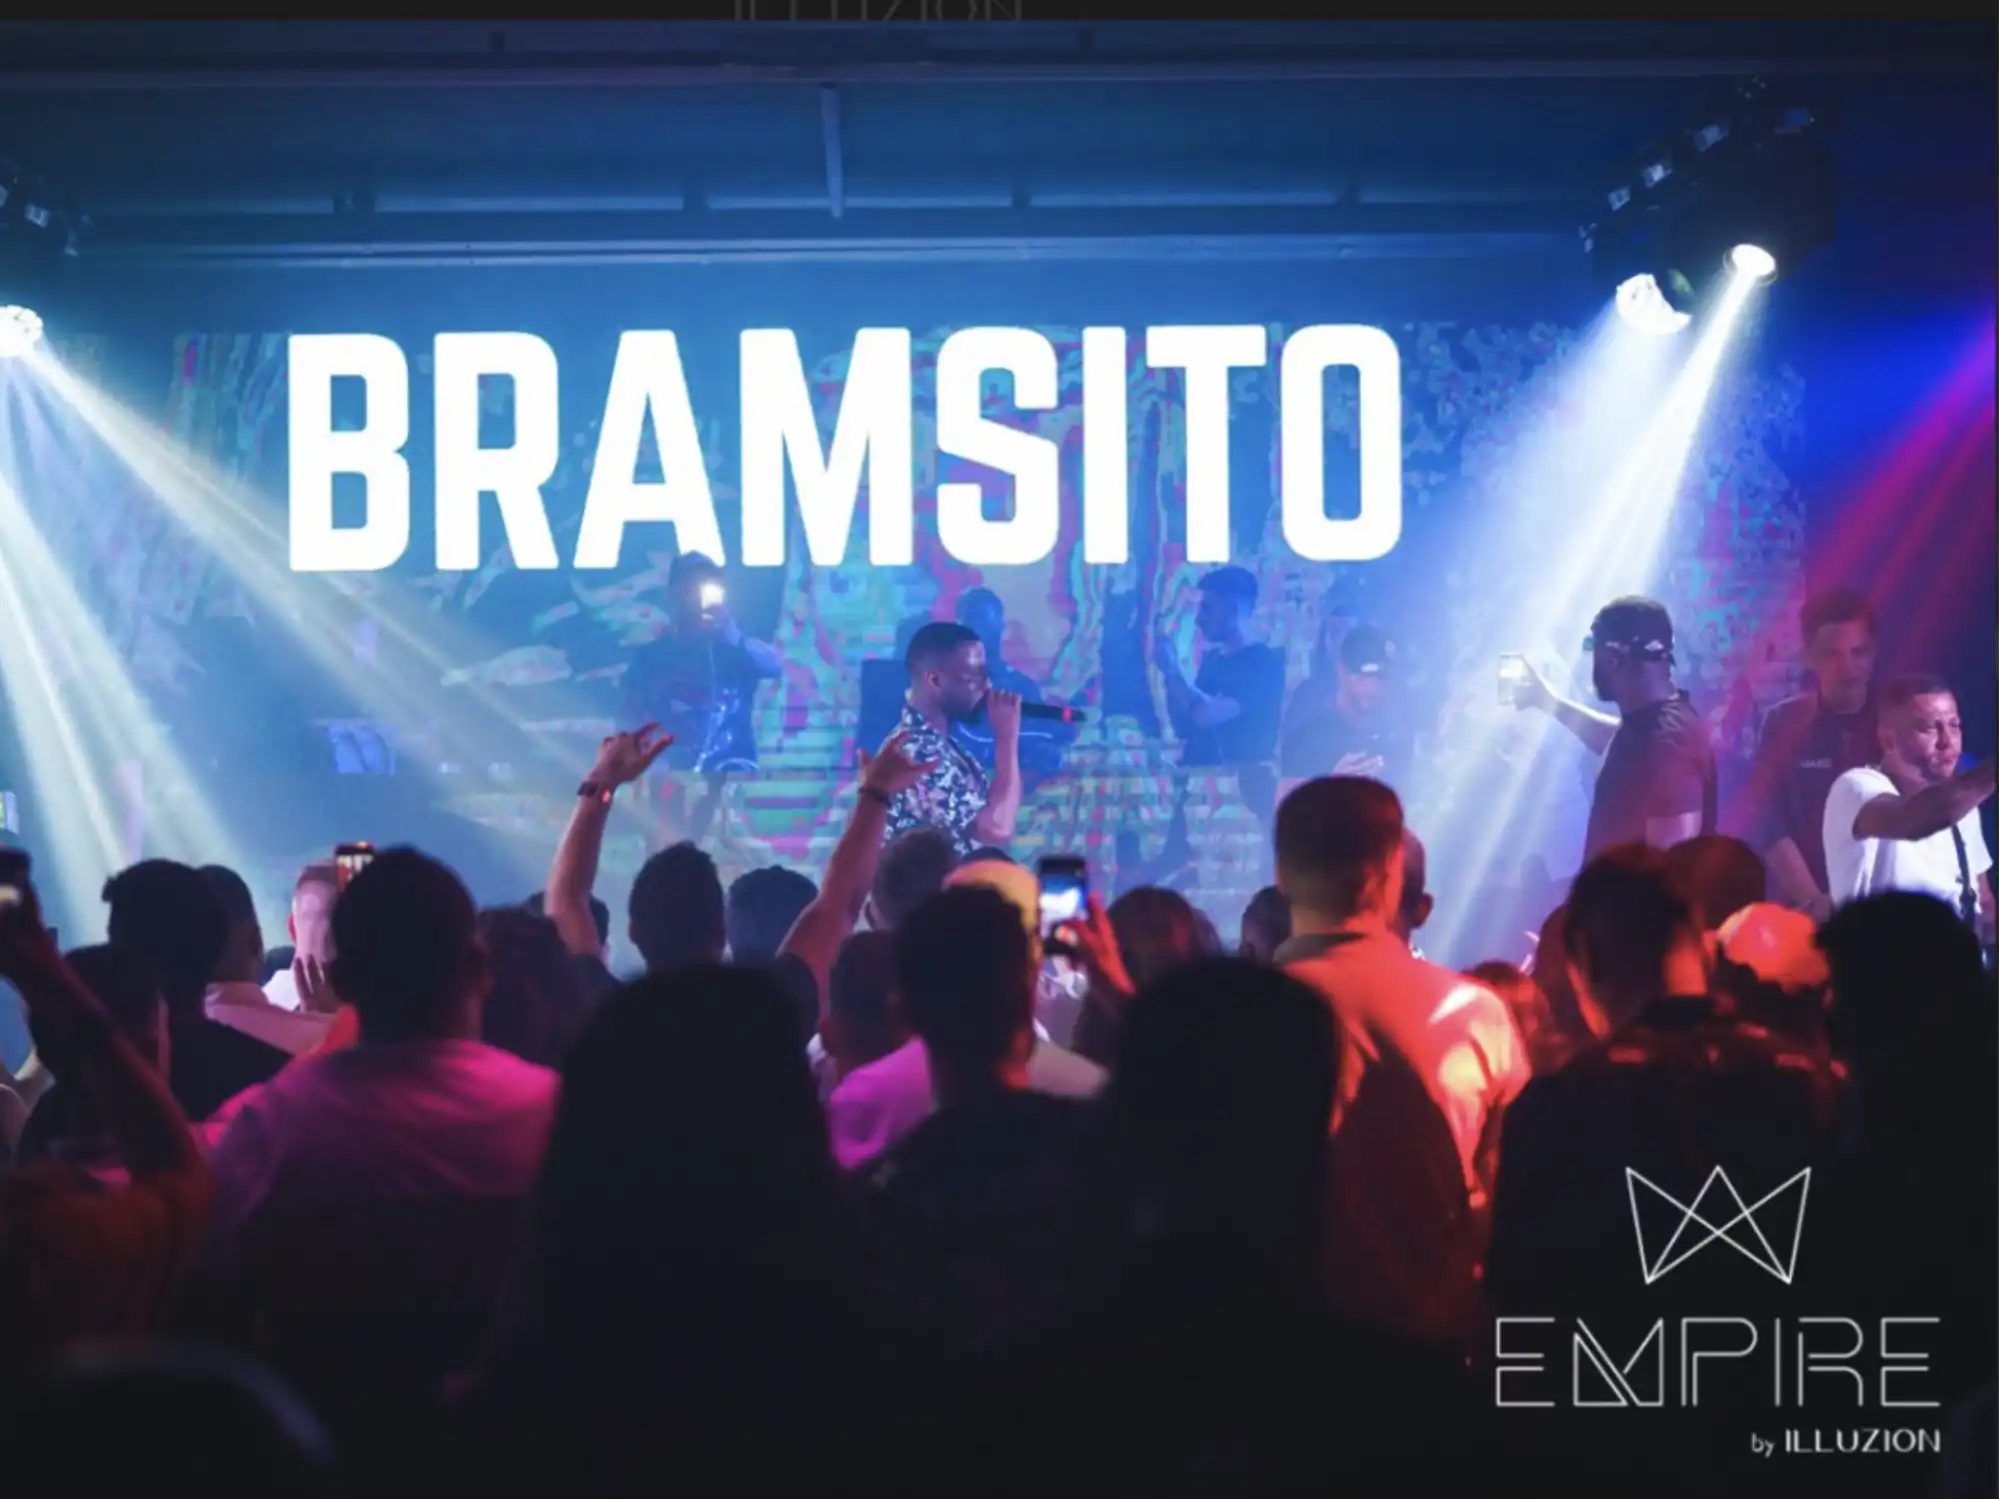 A lively club atmosphere with the word "BRAMSITO" illuminated on stage, with beams of stage lights cutting across the scene. A crowd of people with raised hands appears to be enjoying the performance, encapsulating a high-energy nightlife event at EMPIRE by Illuzion.